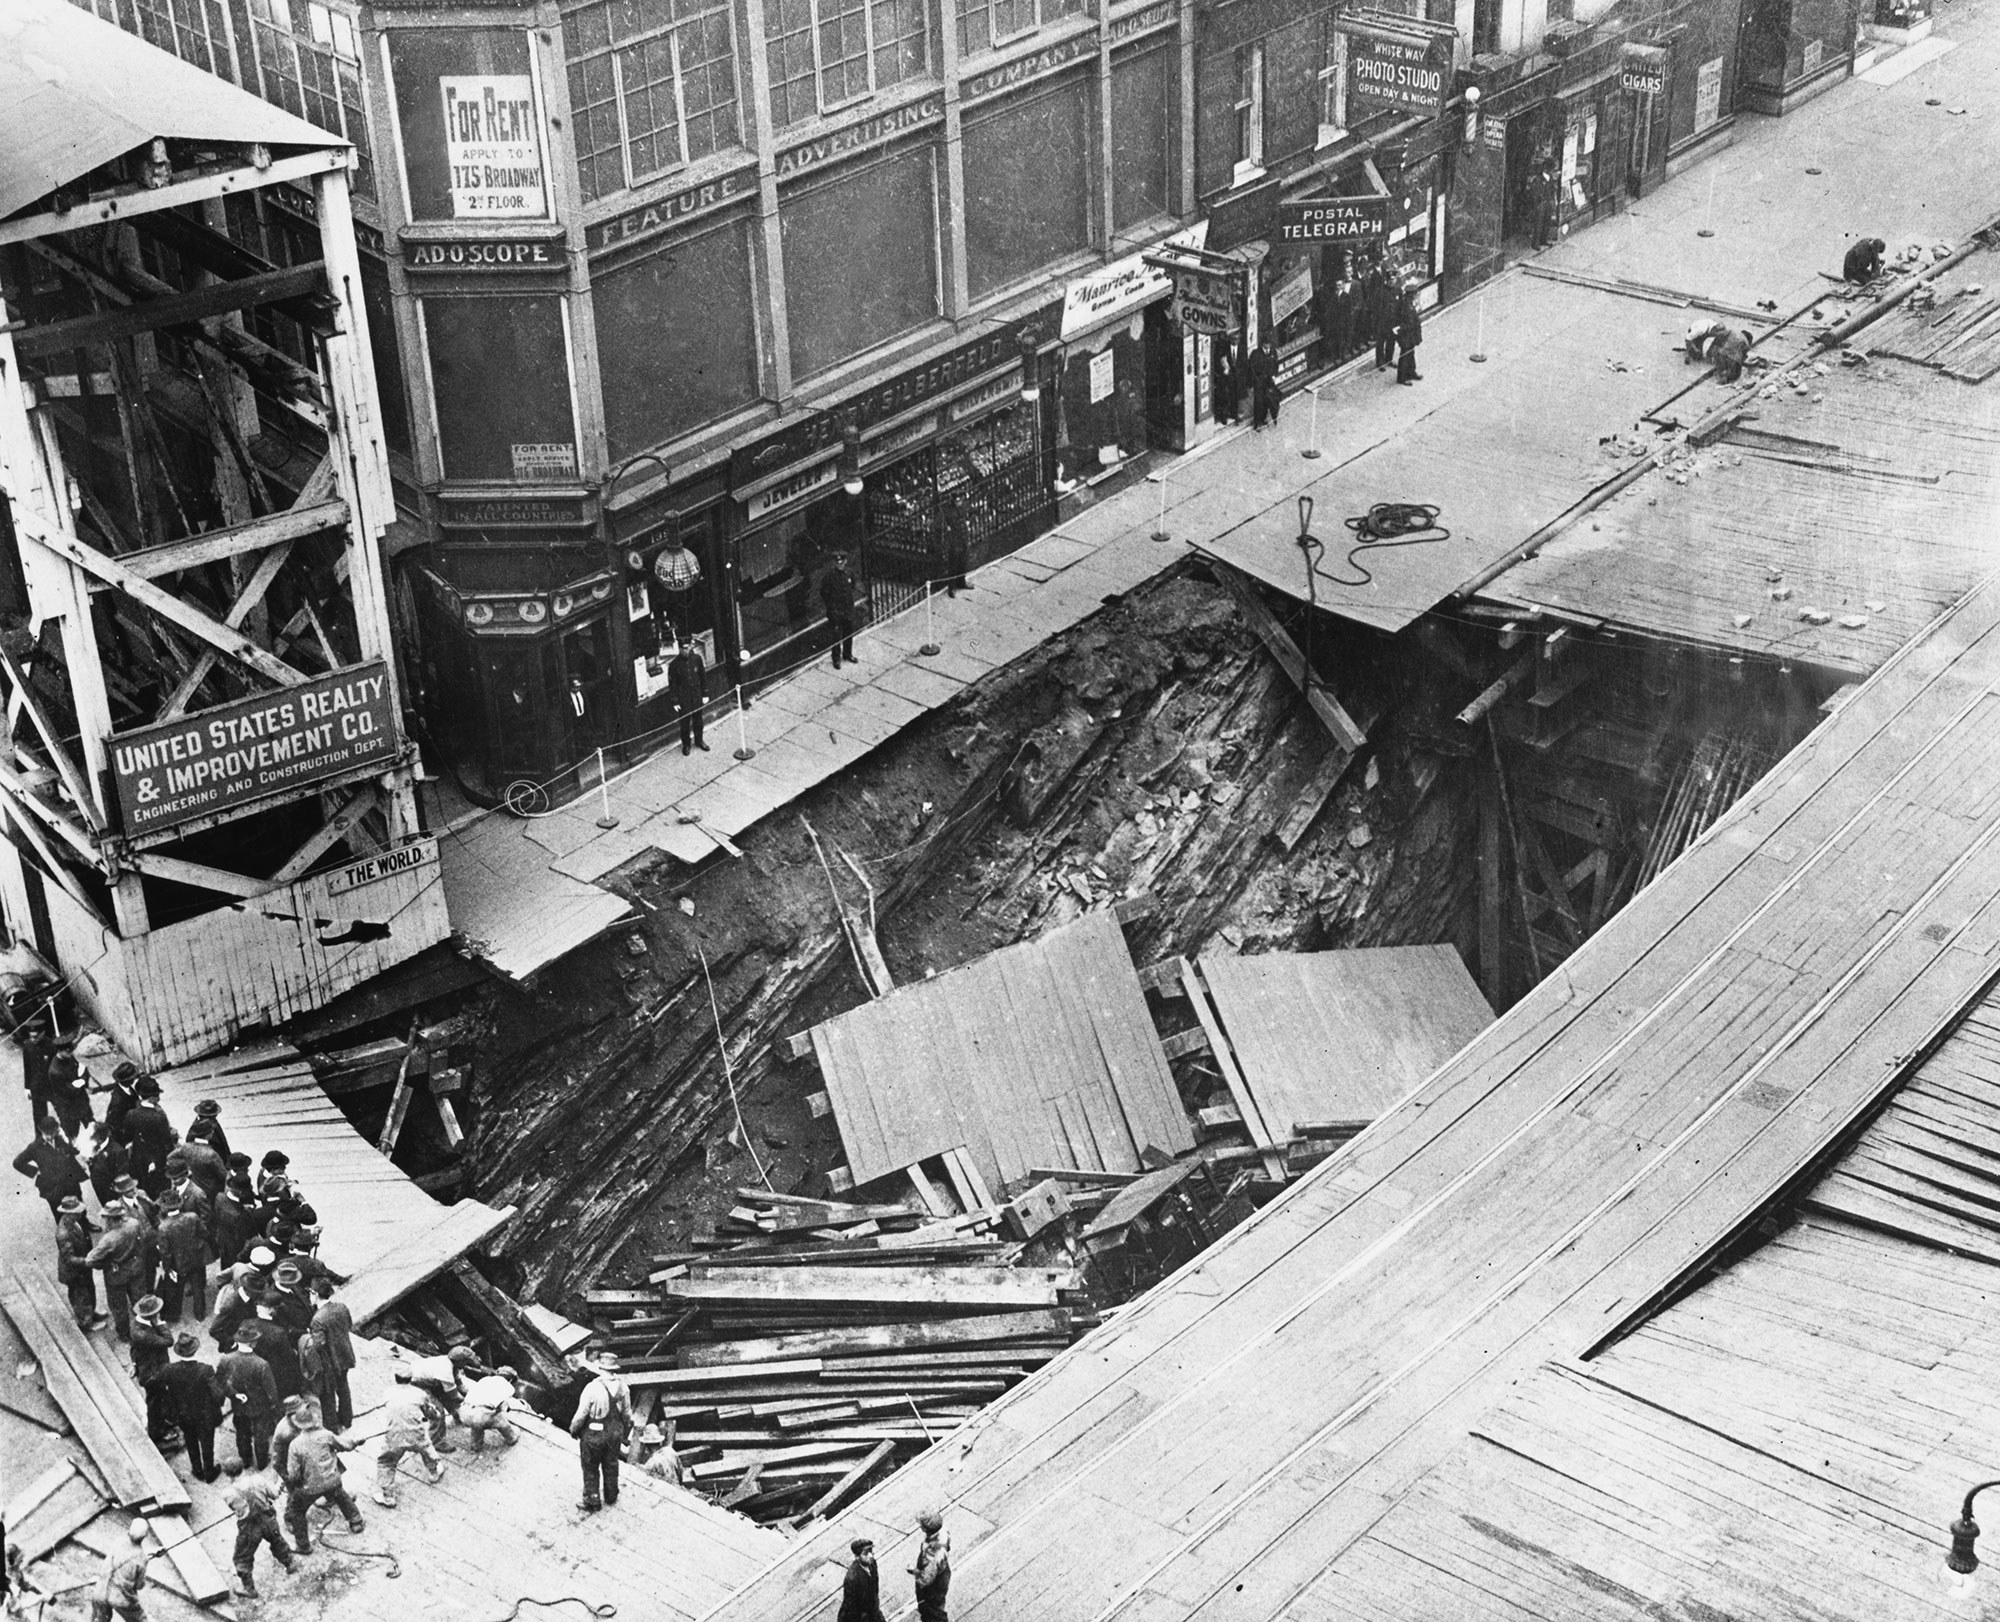 A partial collapse on a street covered in wooden planks shows the underground construction